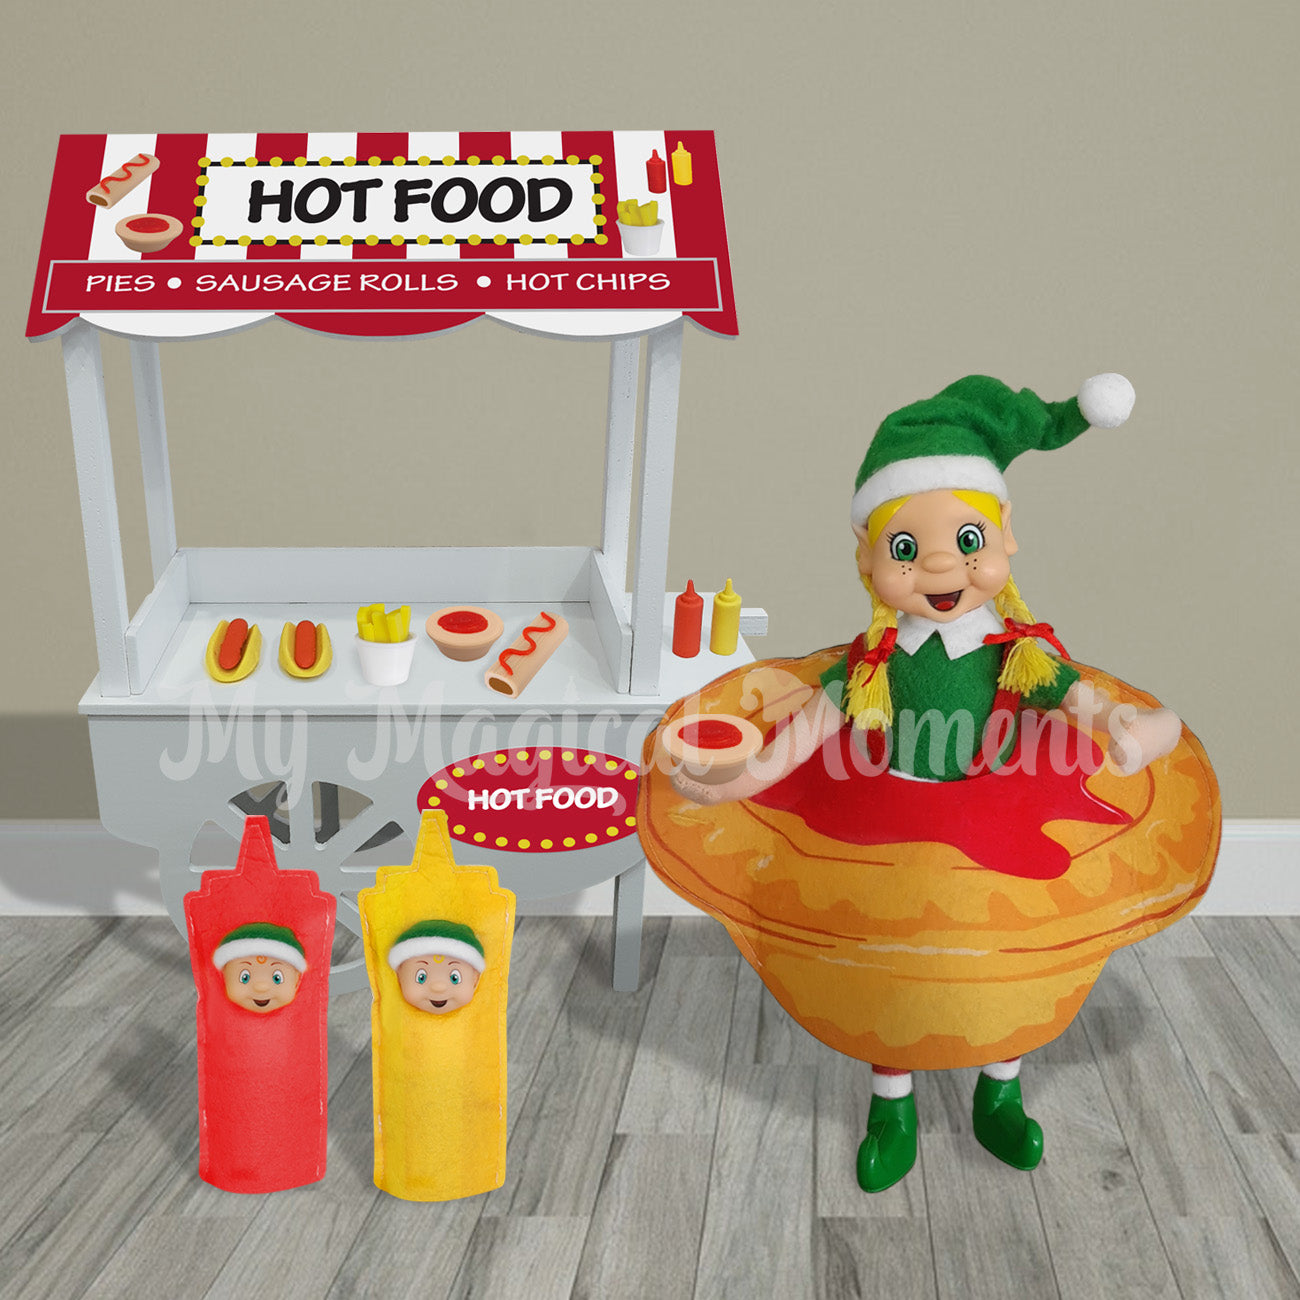 Elf wearing a pie costume selling hot food at a fast food stand with elf toddlers dressed as sauce